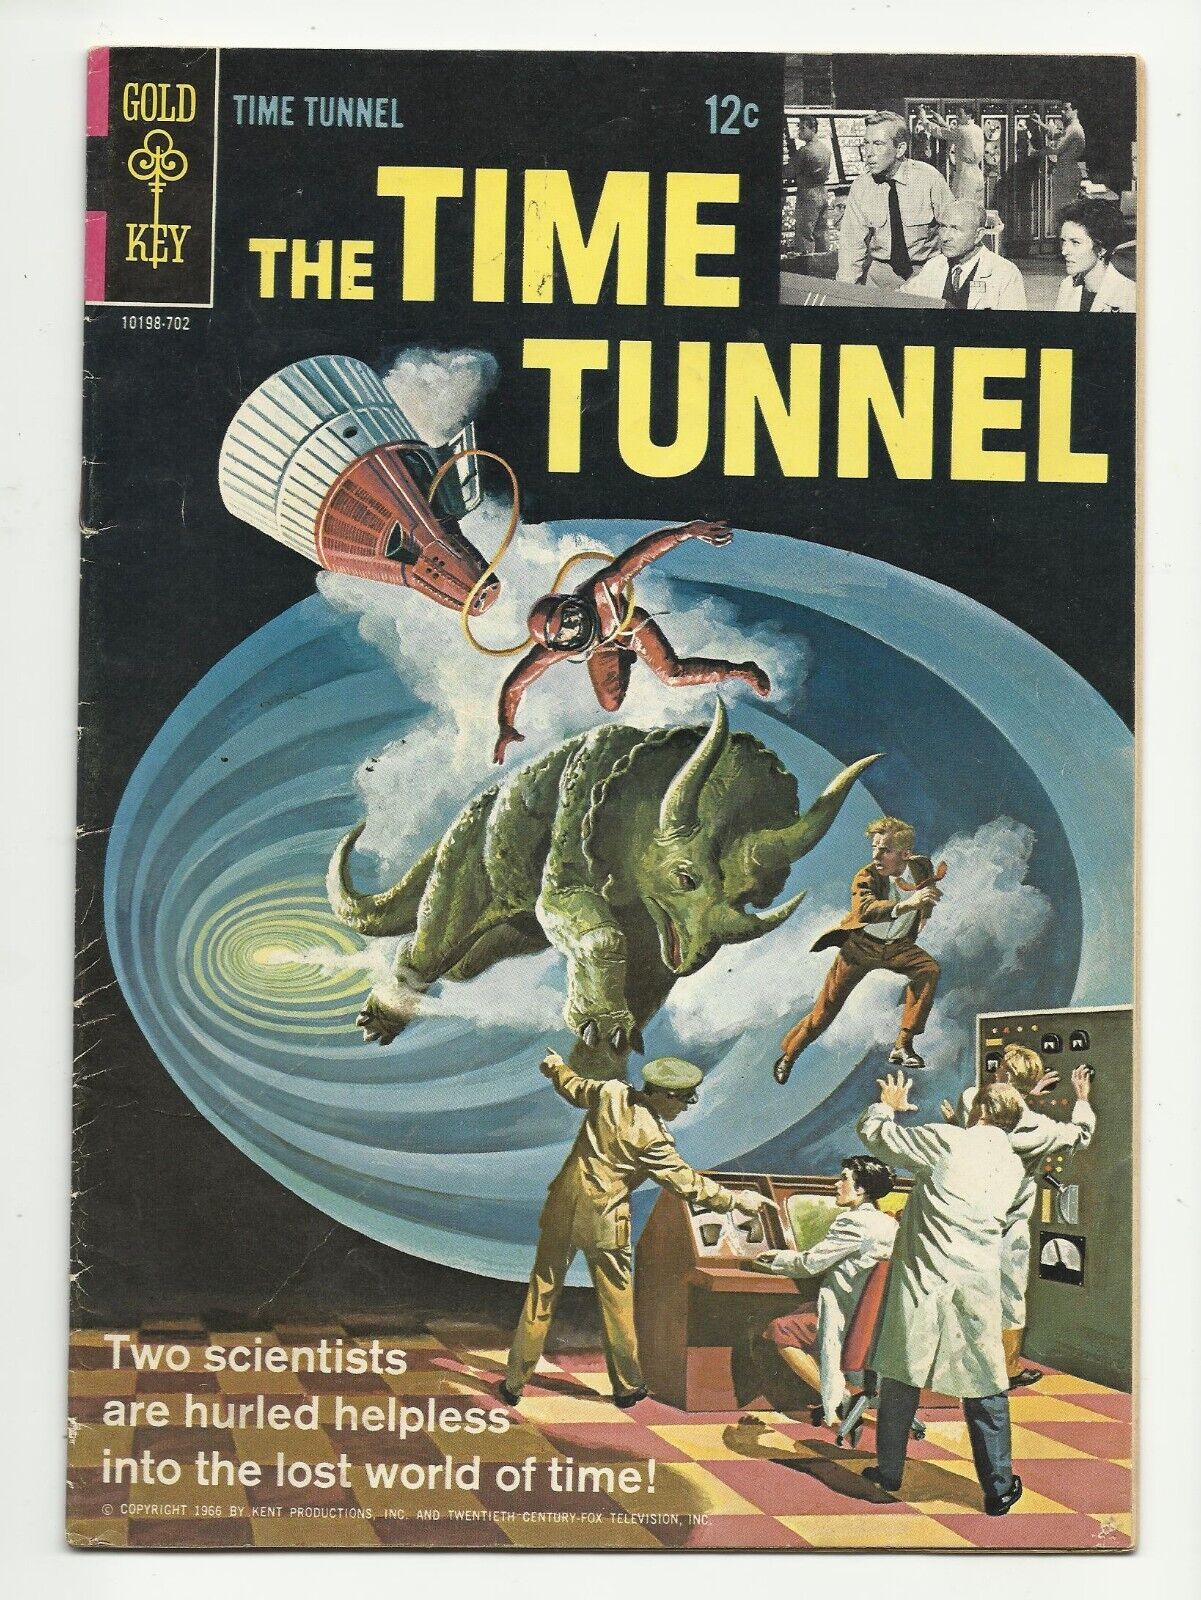 The Time Tunnel #1  - Silver Age Gold Key - back Photo cover - VG 4.0